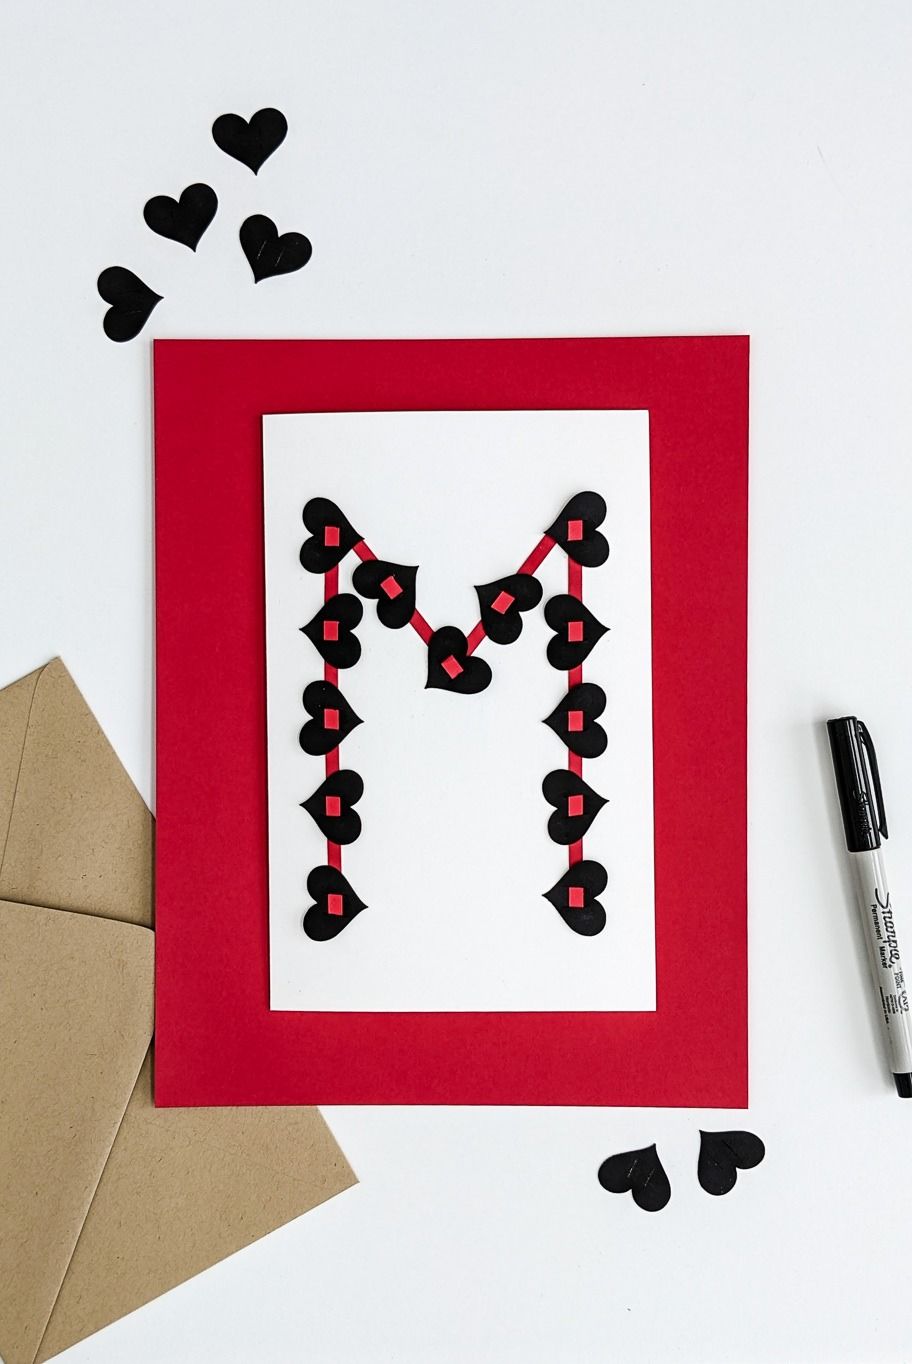 diy valentine with the initial m made of small black paper hearts strung along a red outline on a white card with red border